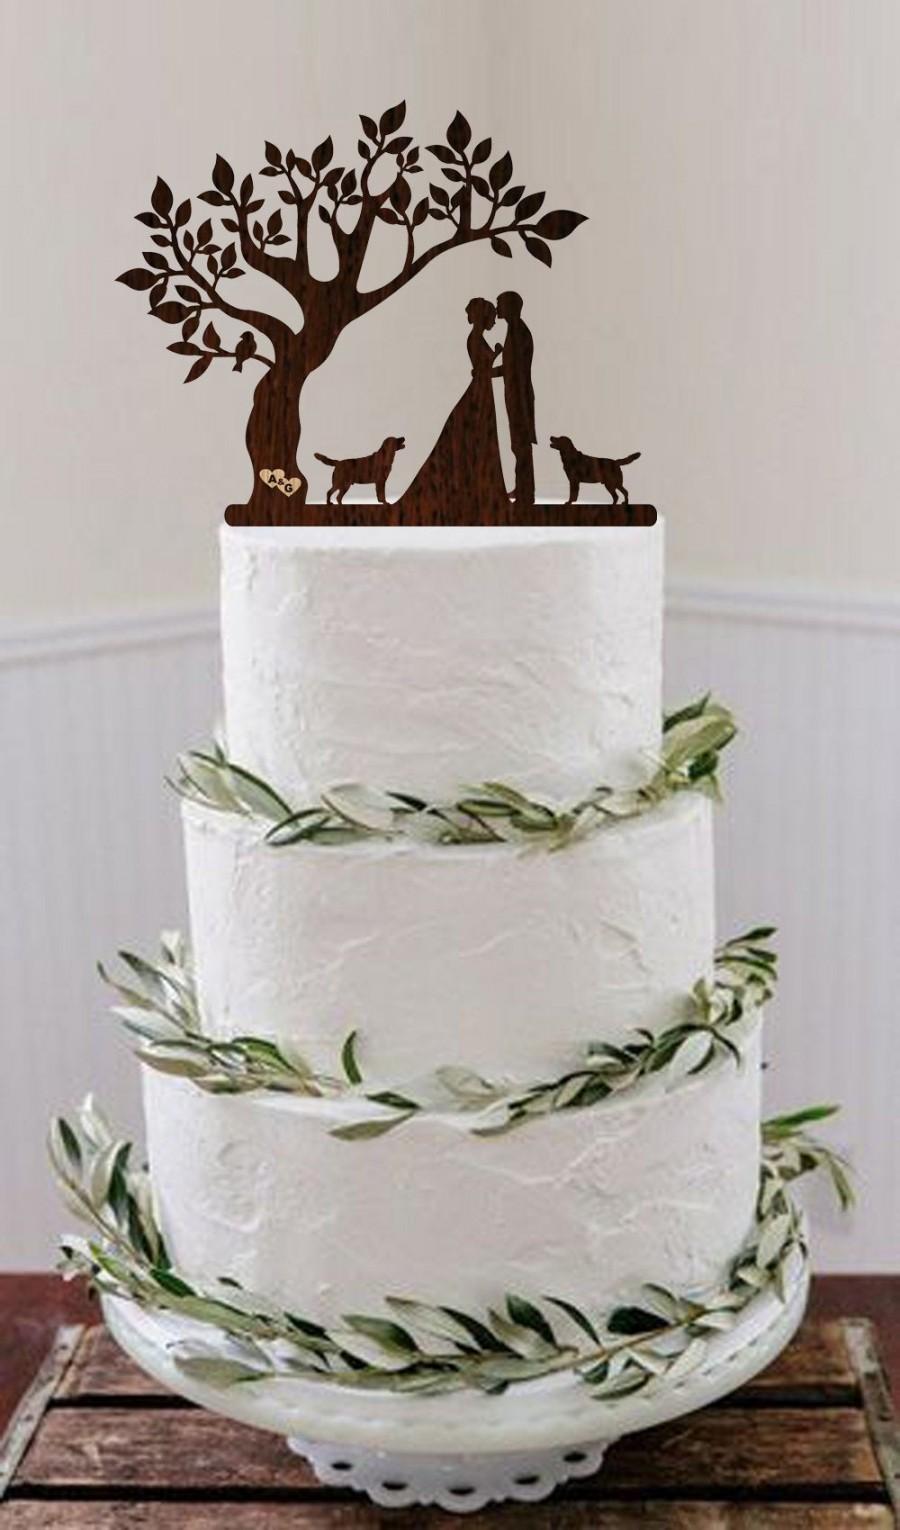 We Do Mr Mrs Tree Bride And Groom Wooden Cake Topper Stick Wedding Party DIY 